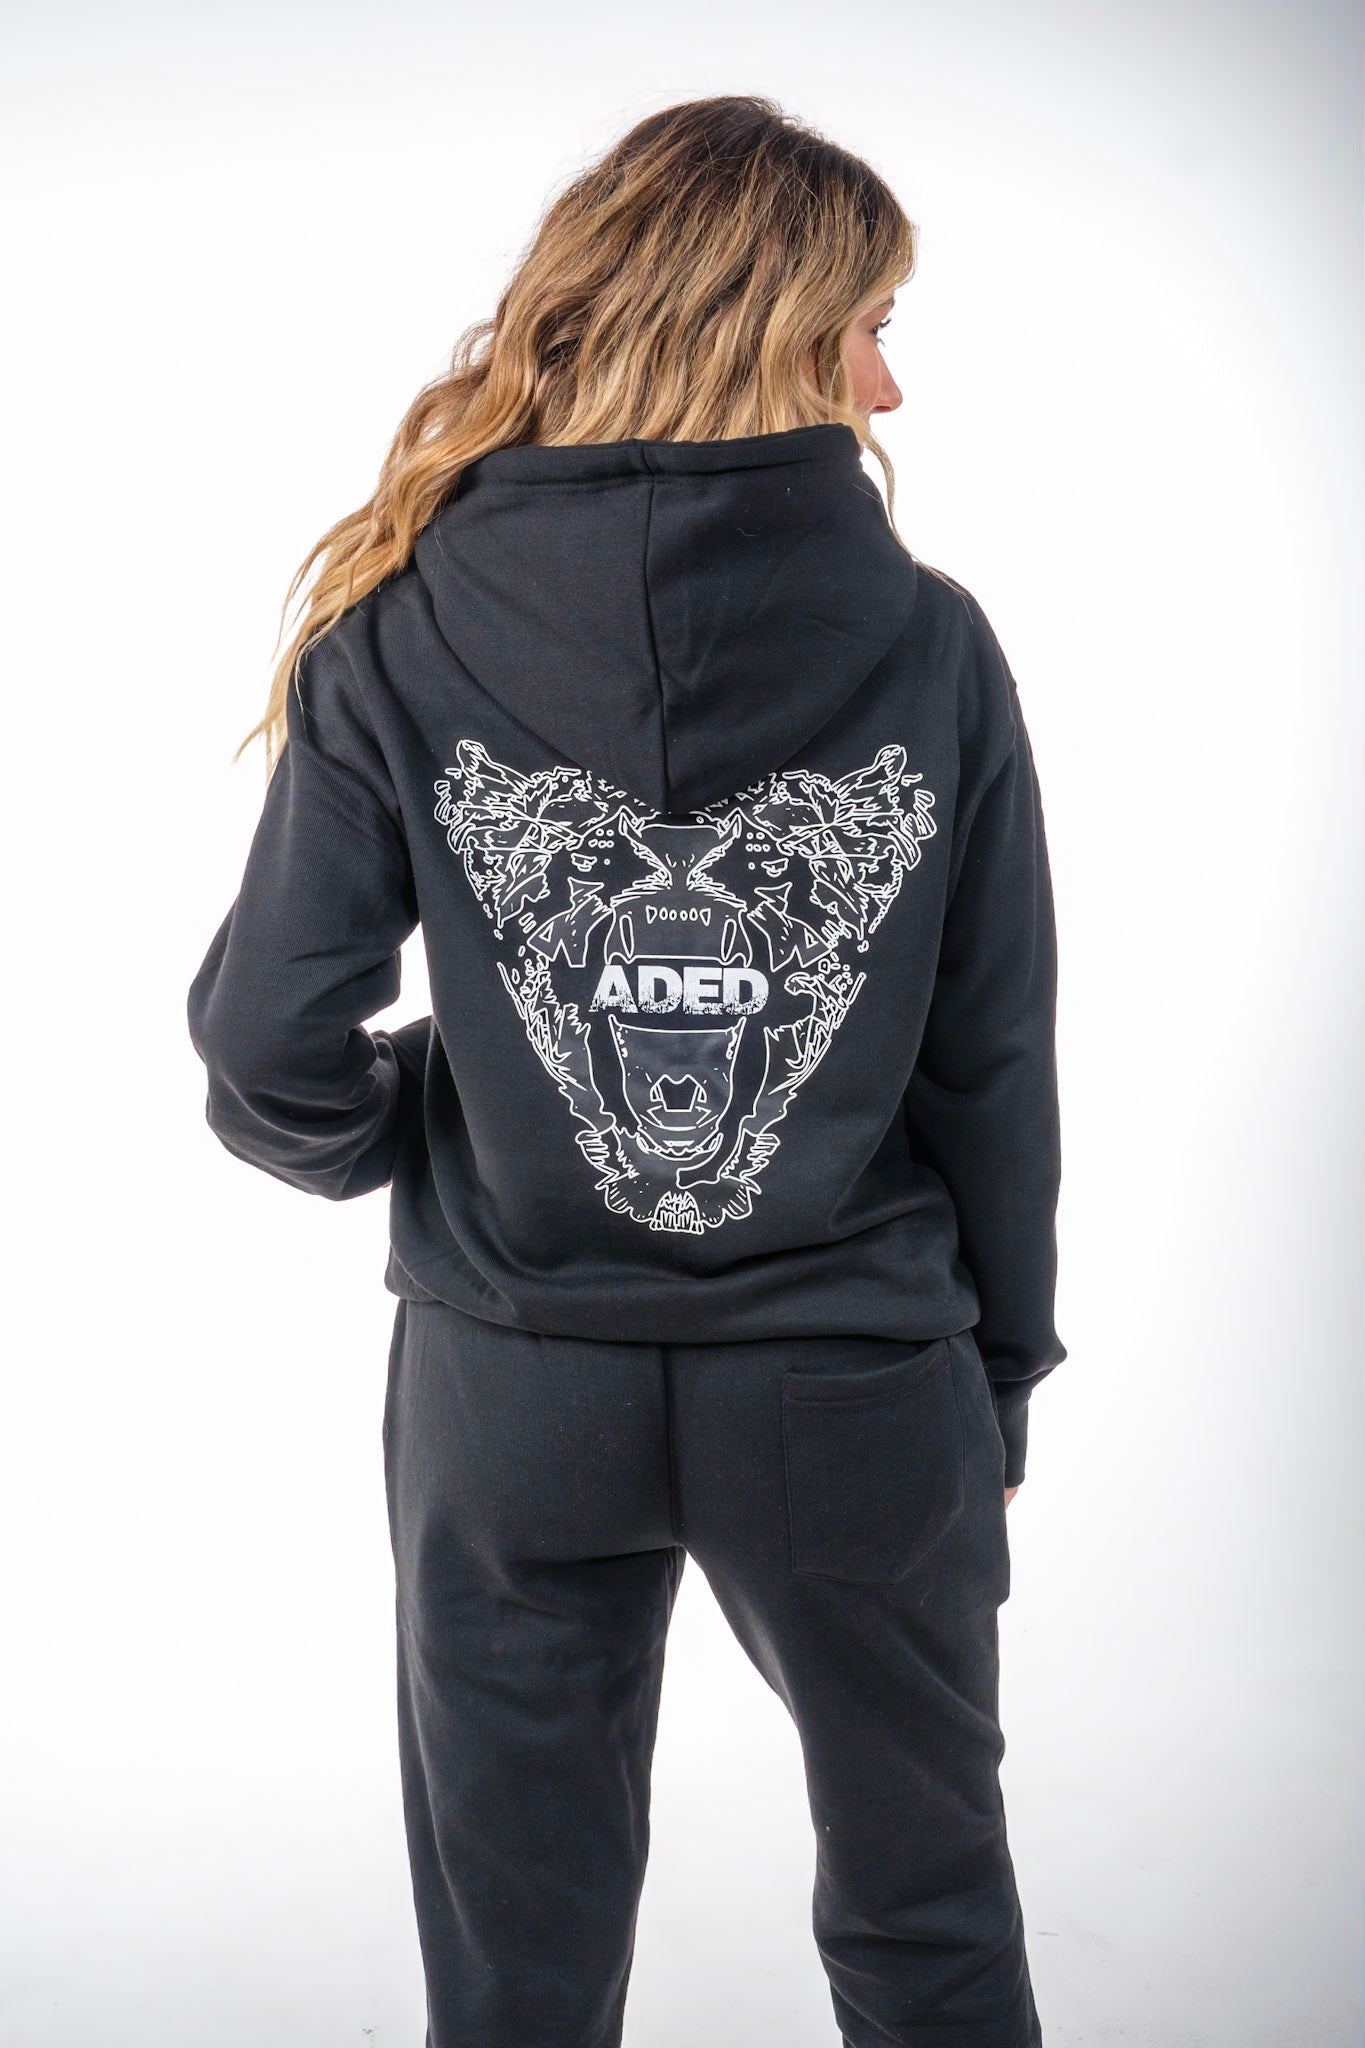 KIDS ALL DAY EVERY DAY Matching SWEAT SUIT (Unisex)